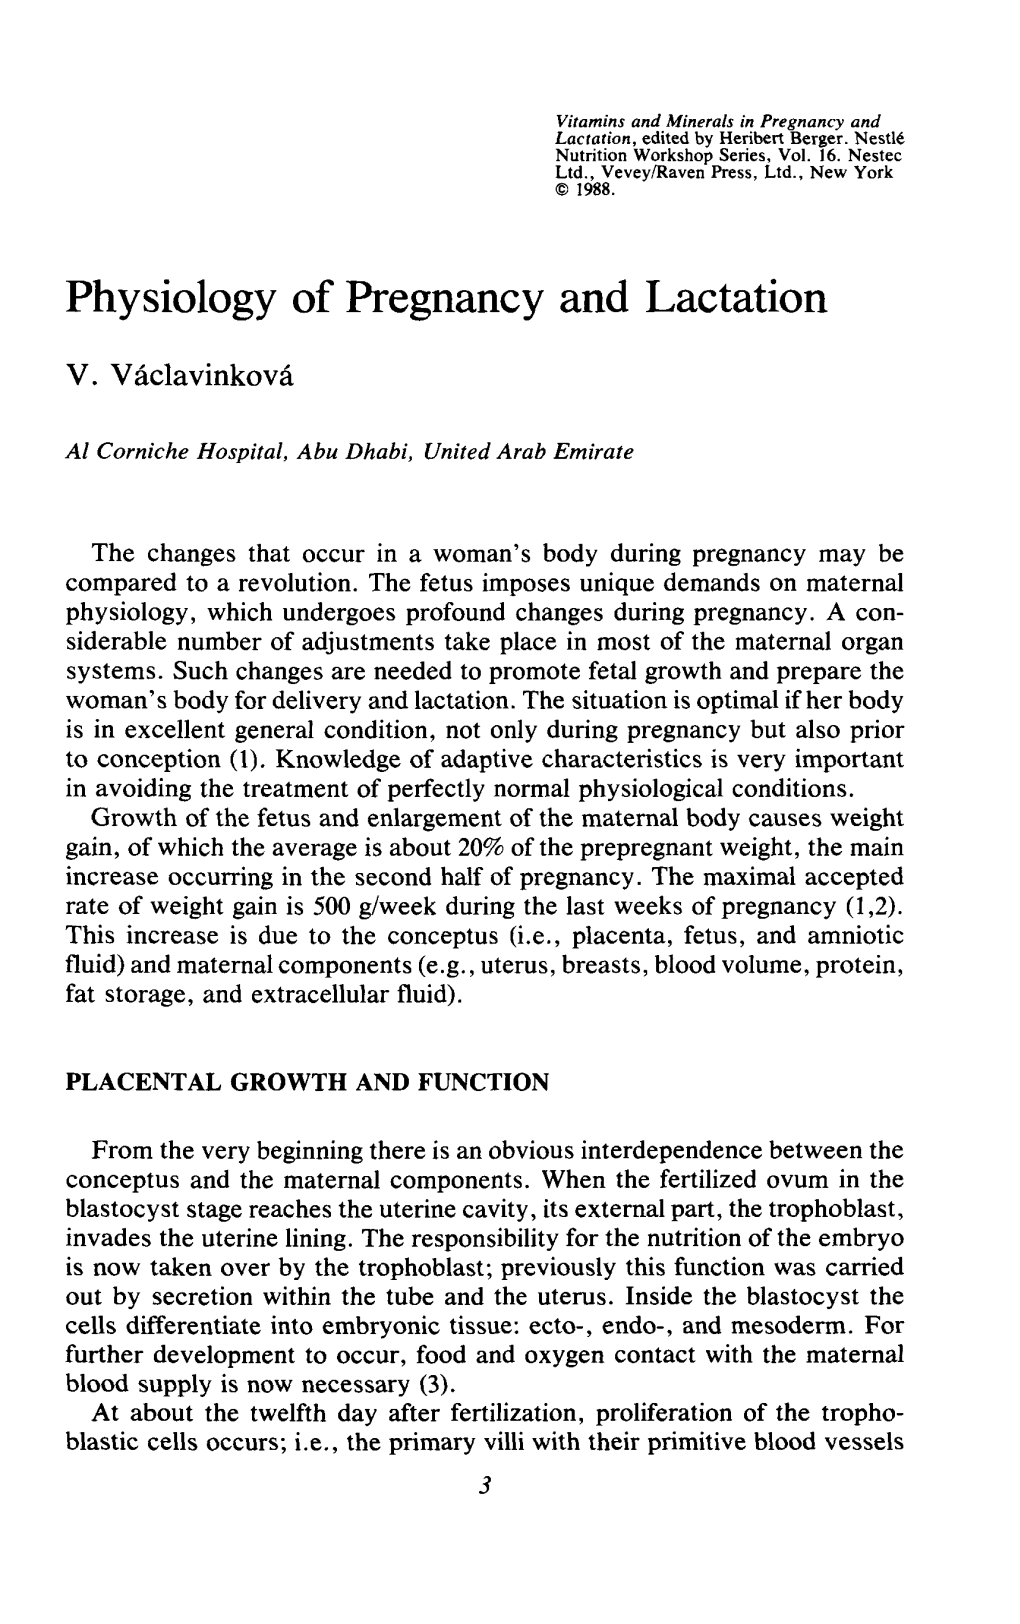 Physiology of Pregnancy and Lactation